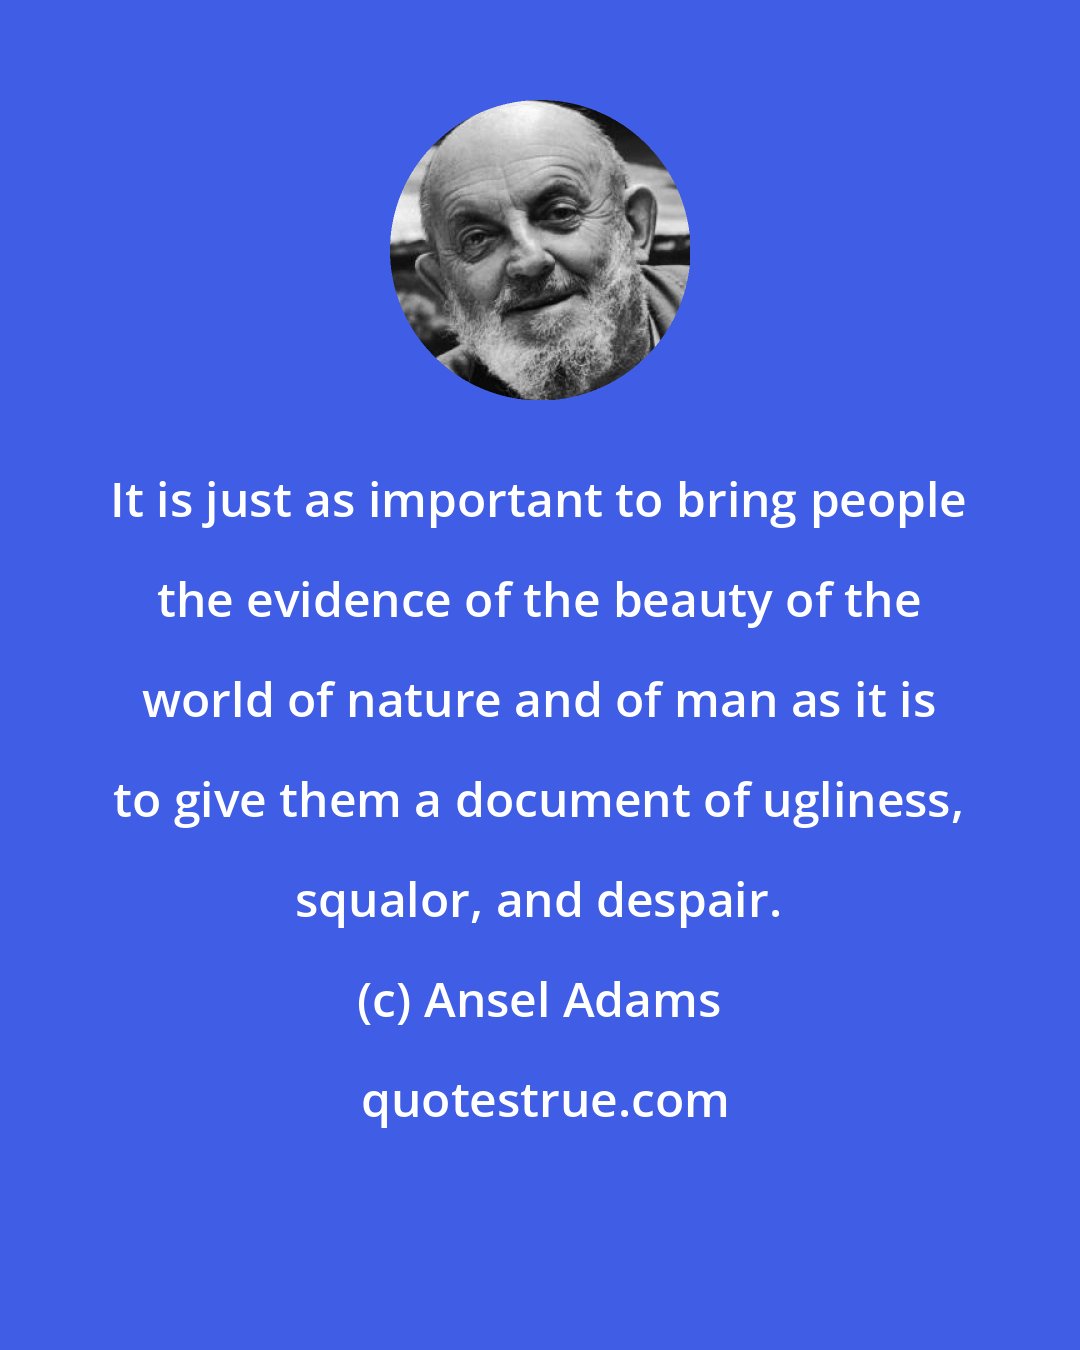 Ansel Adams: It is just as important to bring people the evidence of the beauty of the world of nature and of man as it is to give them a document of ugliness, squalor, and despair.